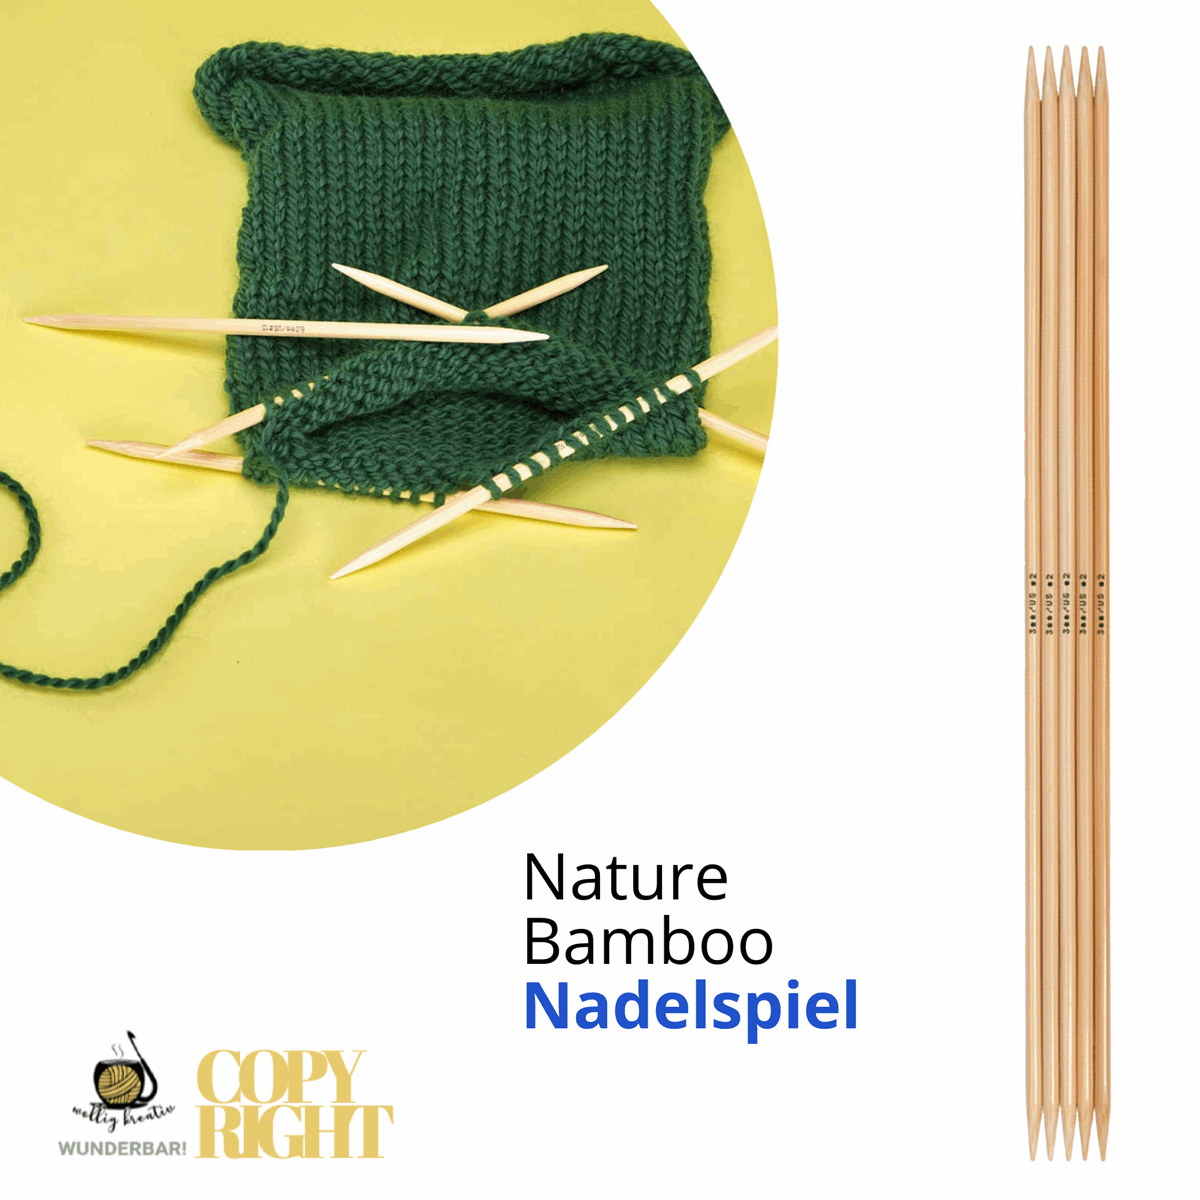 Addi, Nature Bamboo double pointed needles, 65012, size 3 length 20 cm